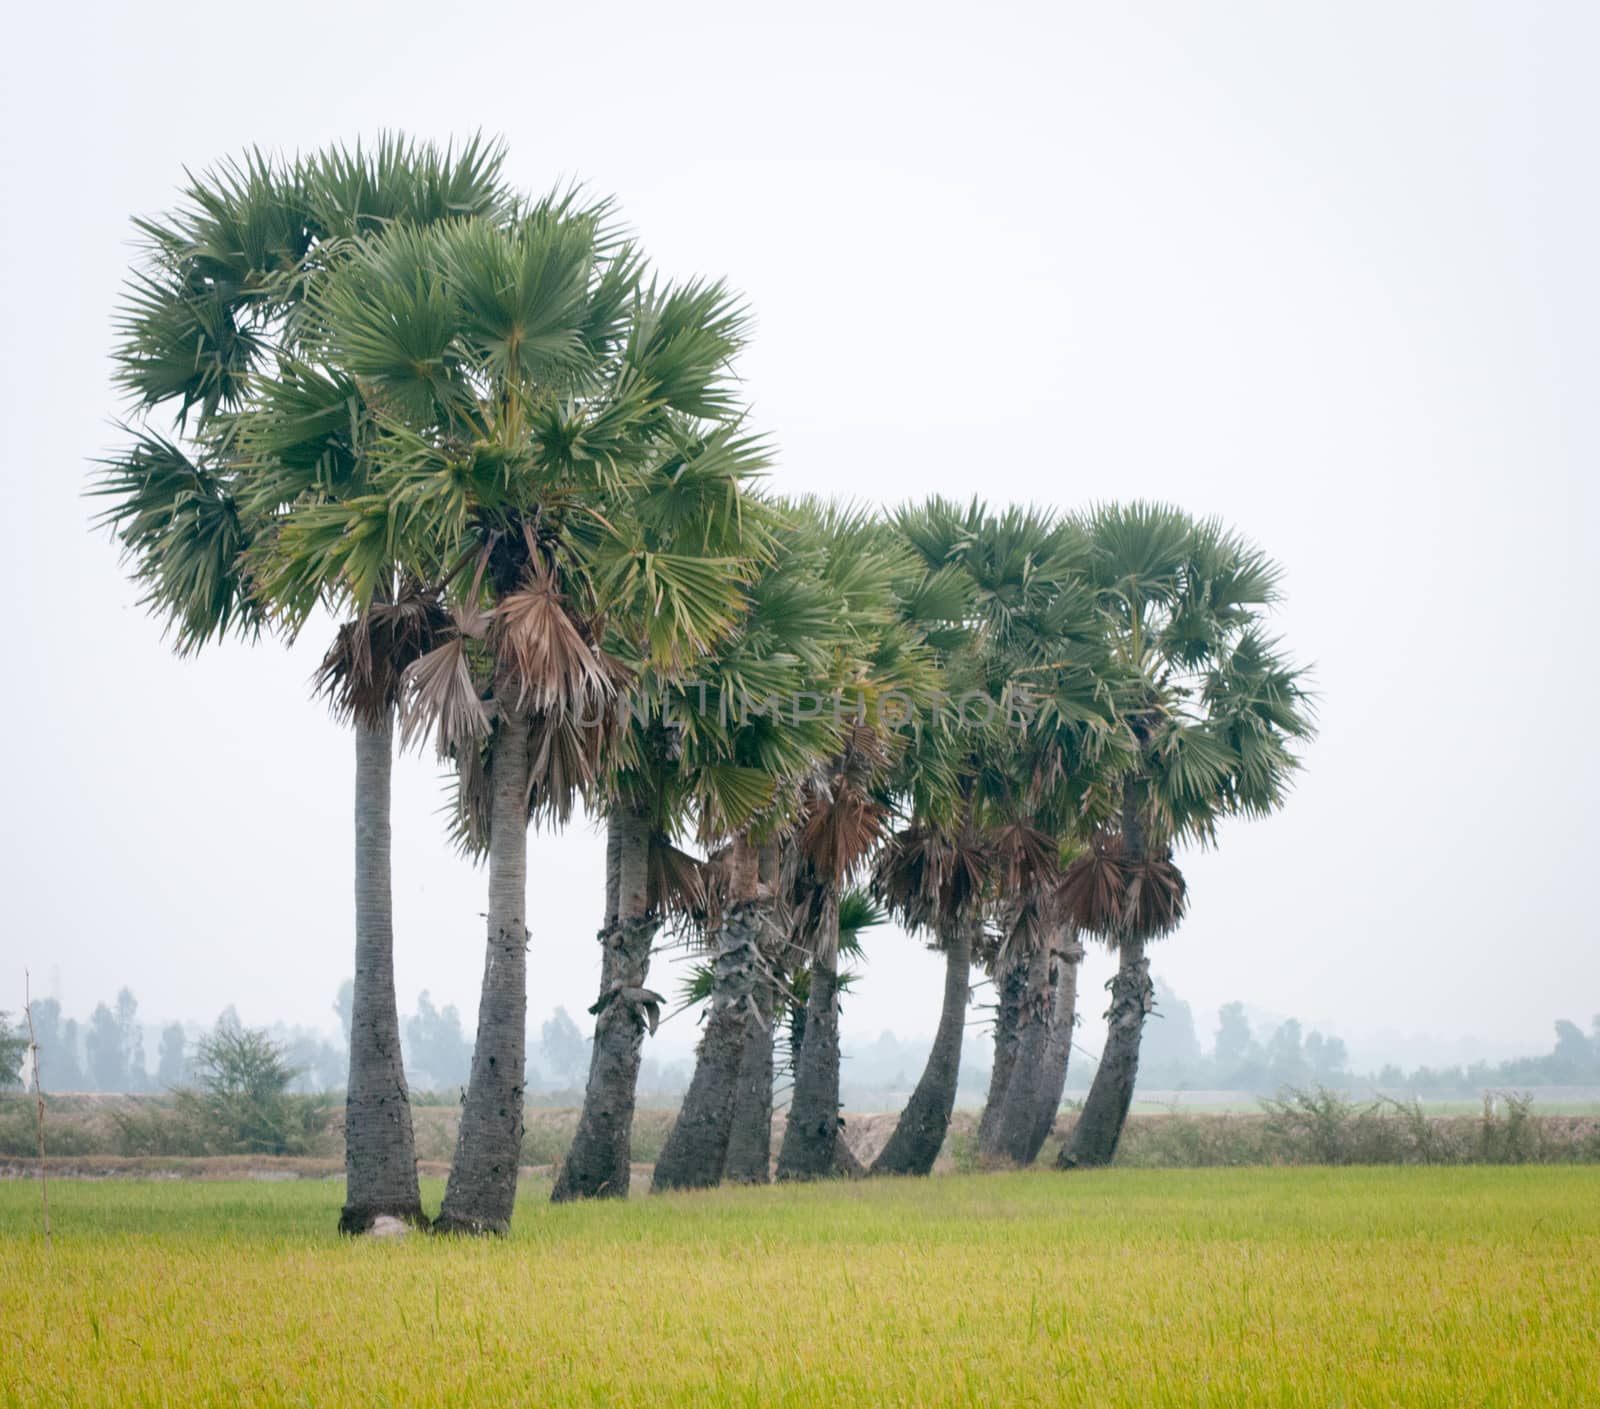 Palm trees on paddy rice field in southern Vietnam by vietimages